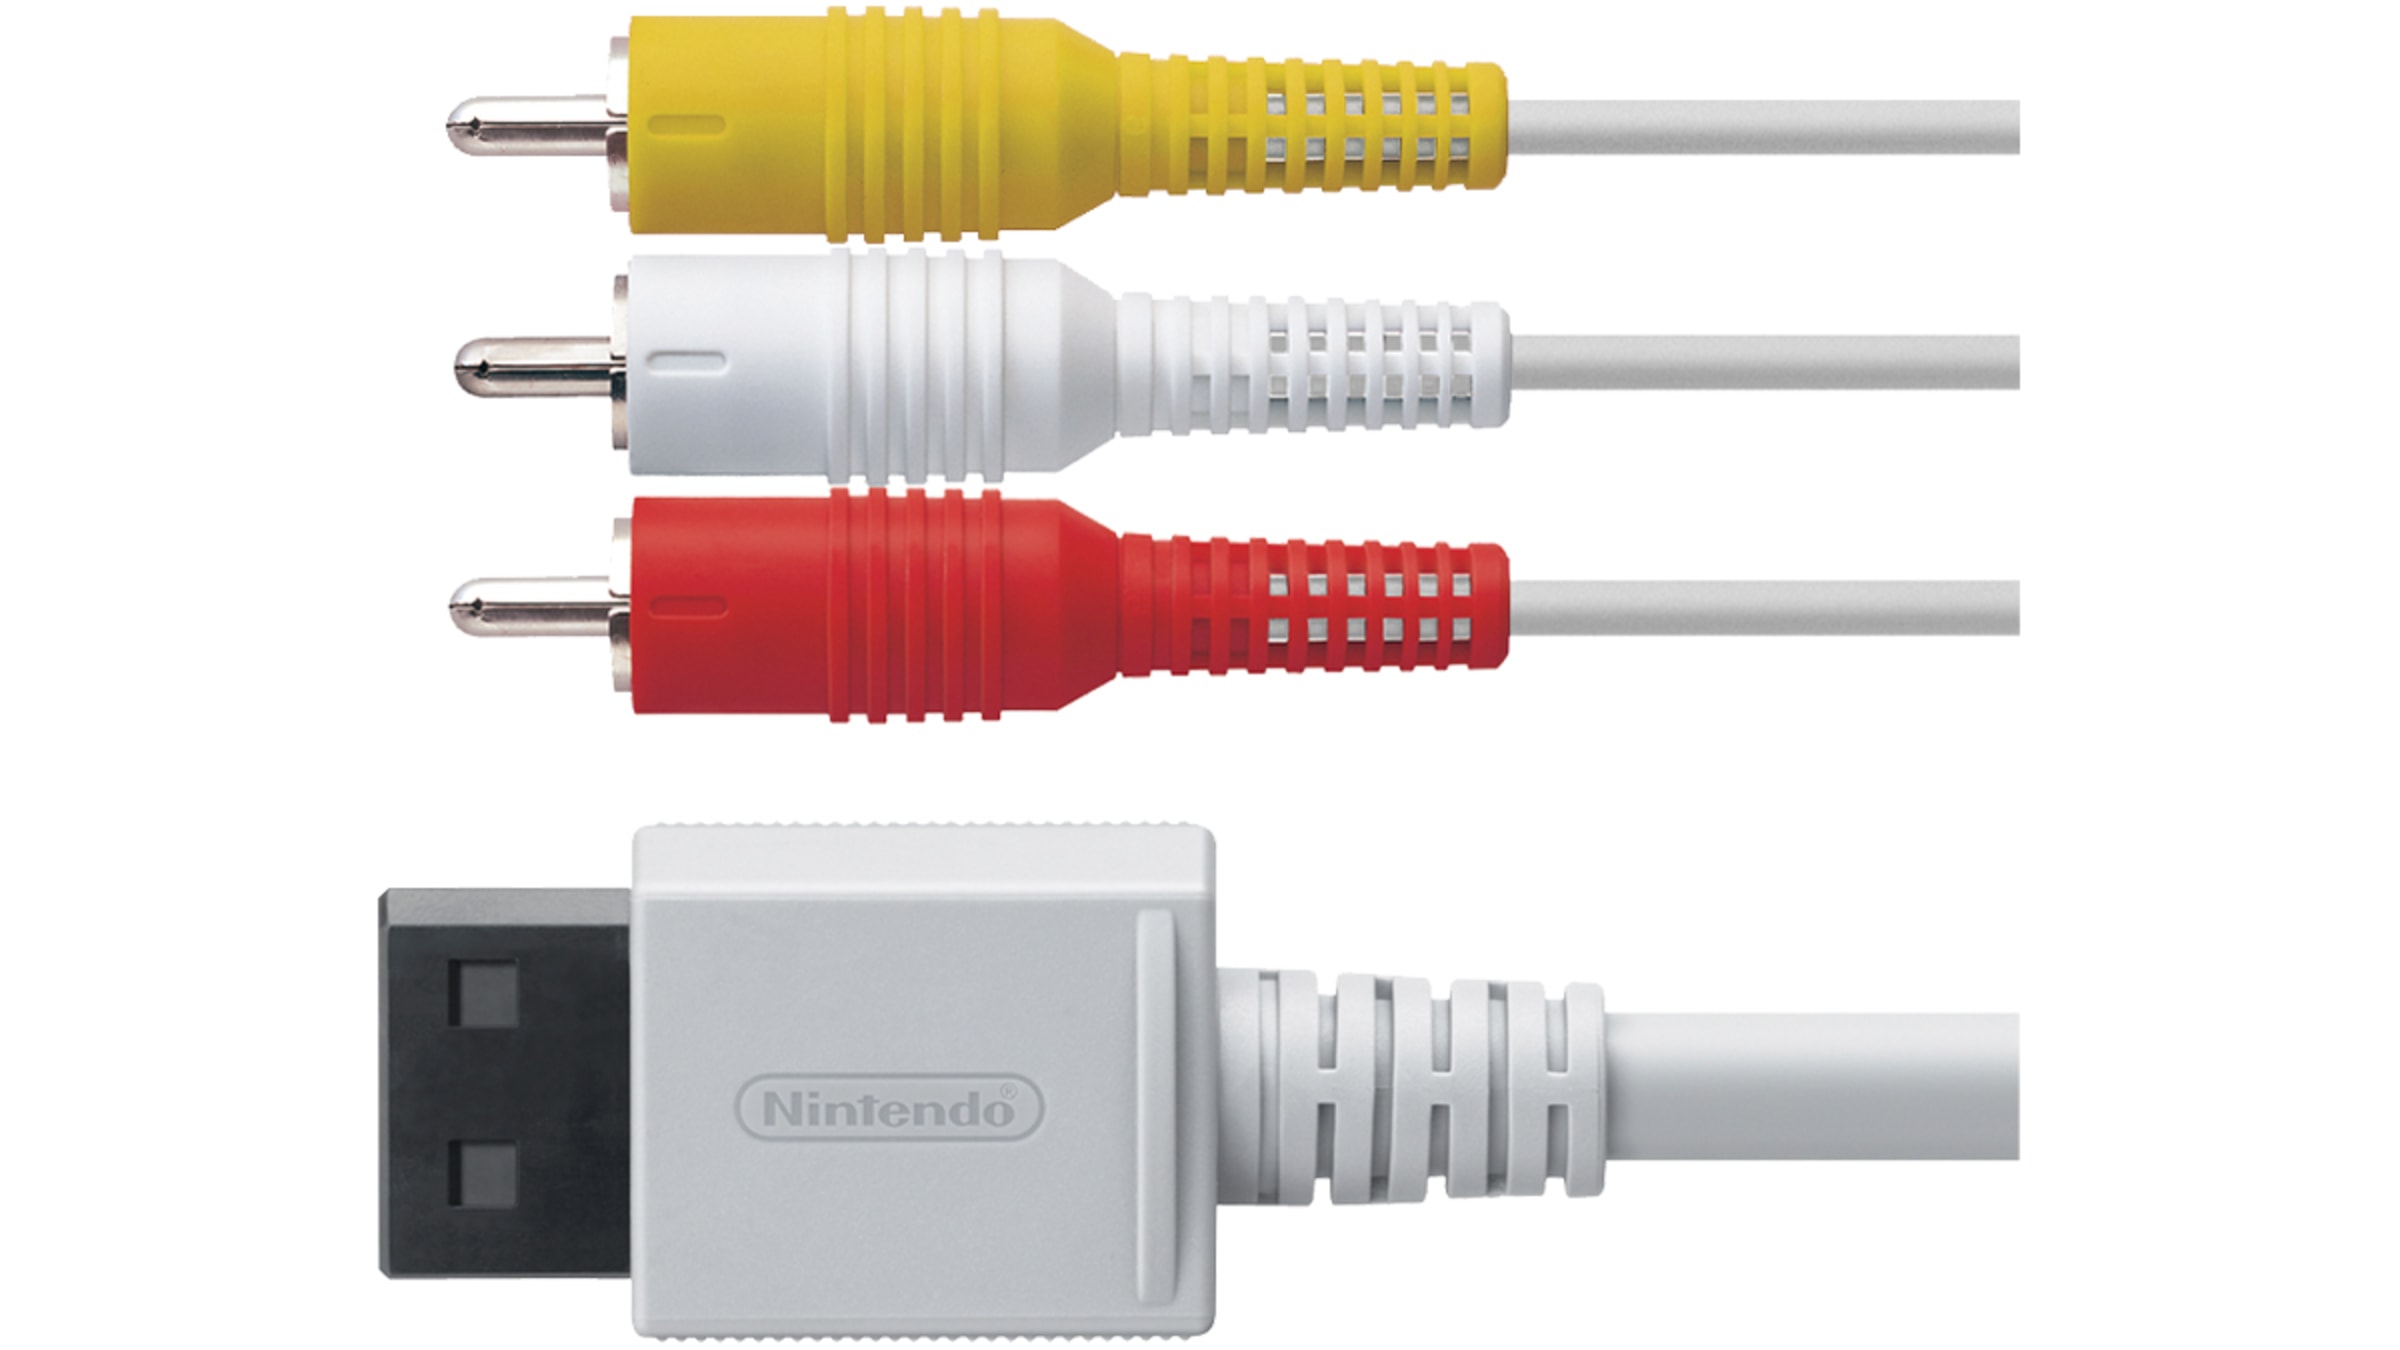 AV Cable for Nintendo Wii (Styles May Vary)